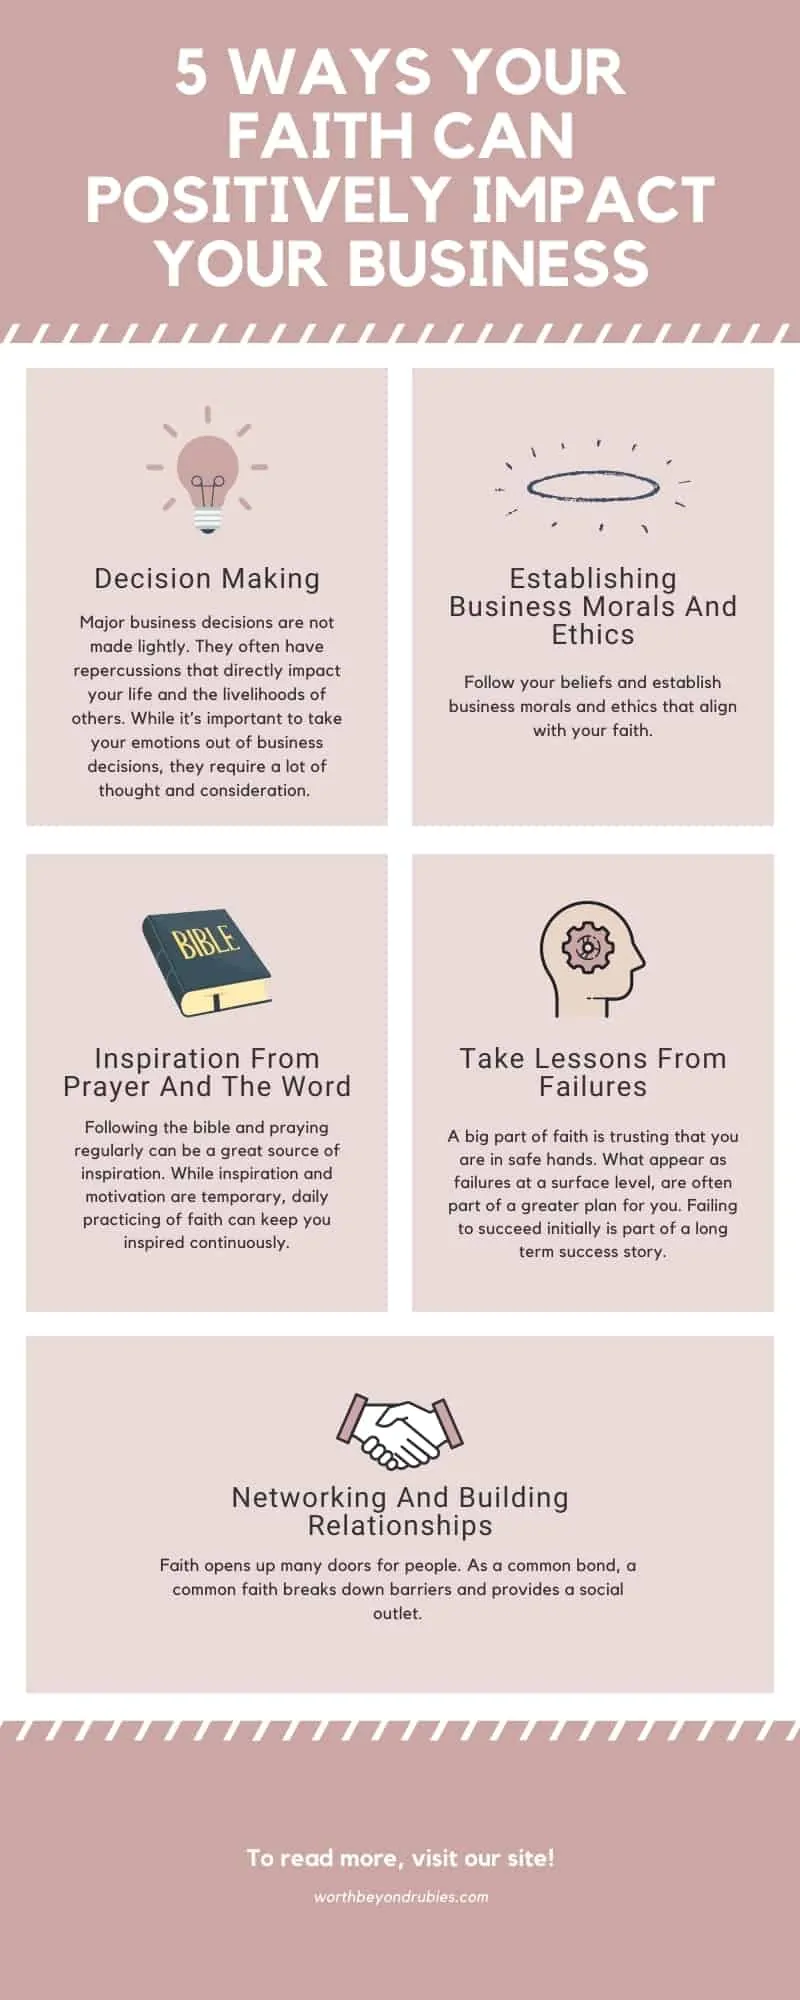 An infographic with 5 ways your faith can impact your business - which is a summary of the list found on the associated blog post